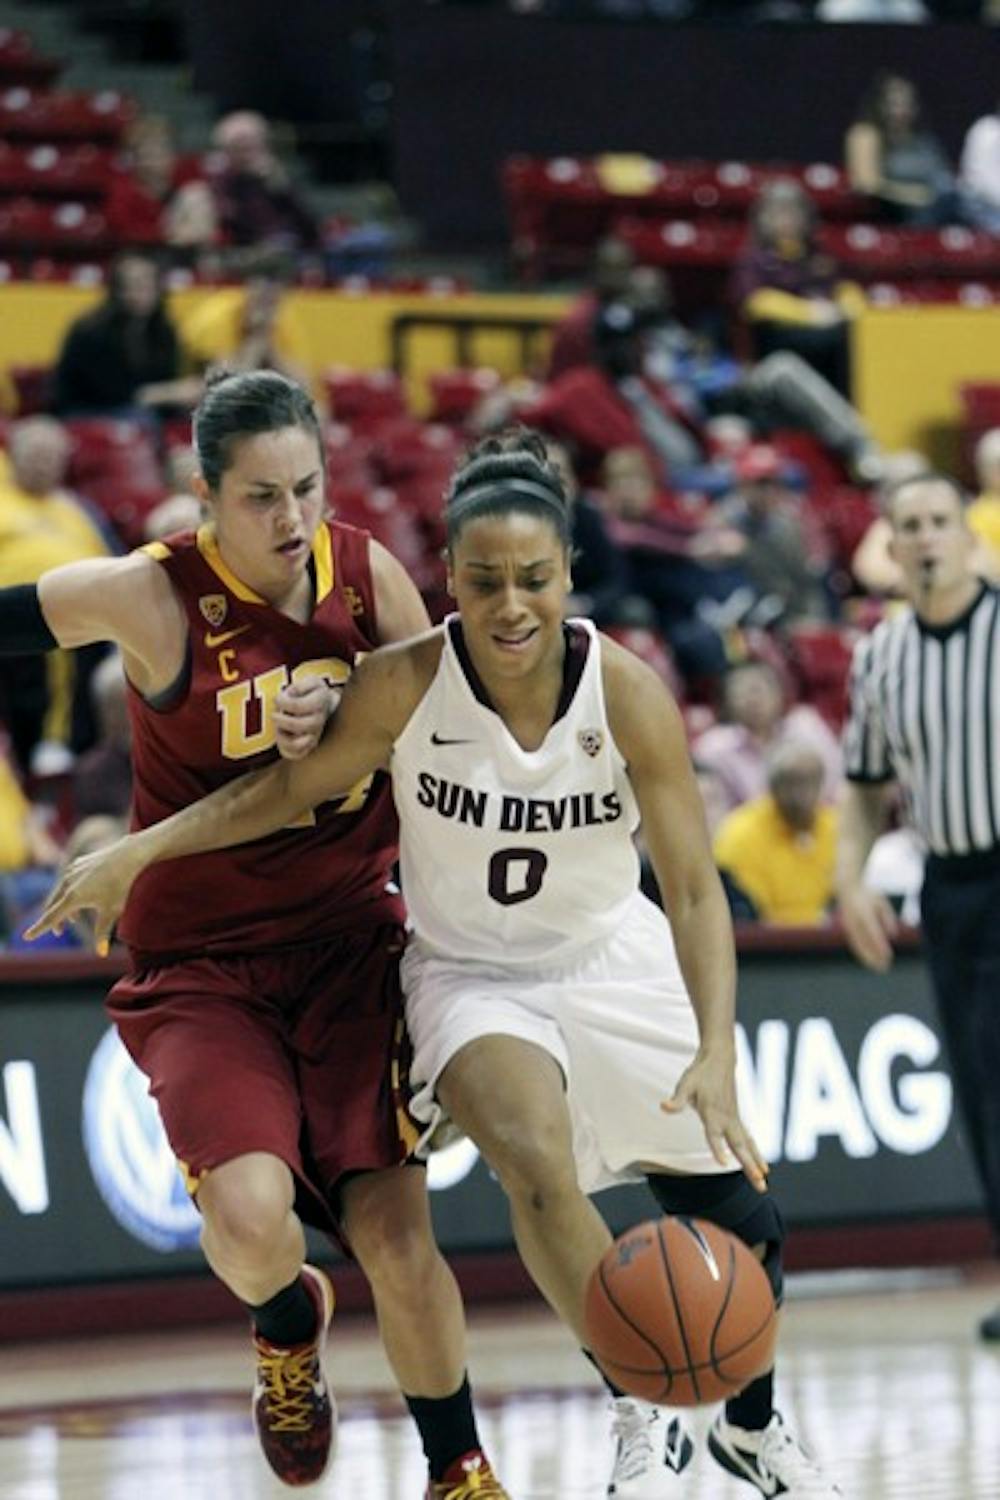 Olivia Major protects the ball in a game against USC Jan. 5. The Sun Devils are looking for Major to contribute offensively in their upcoming games against Oregon and Oregon State. (Photo by Sam Rosenbaum)